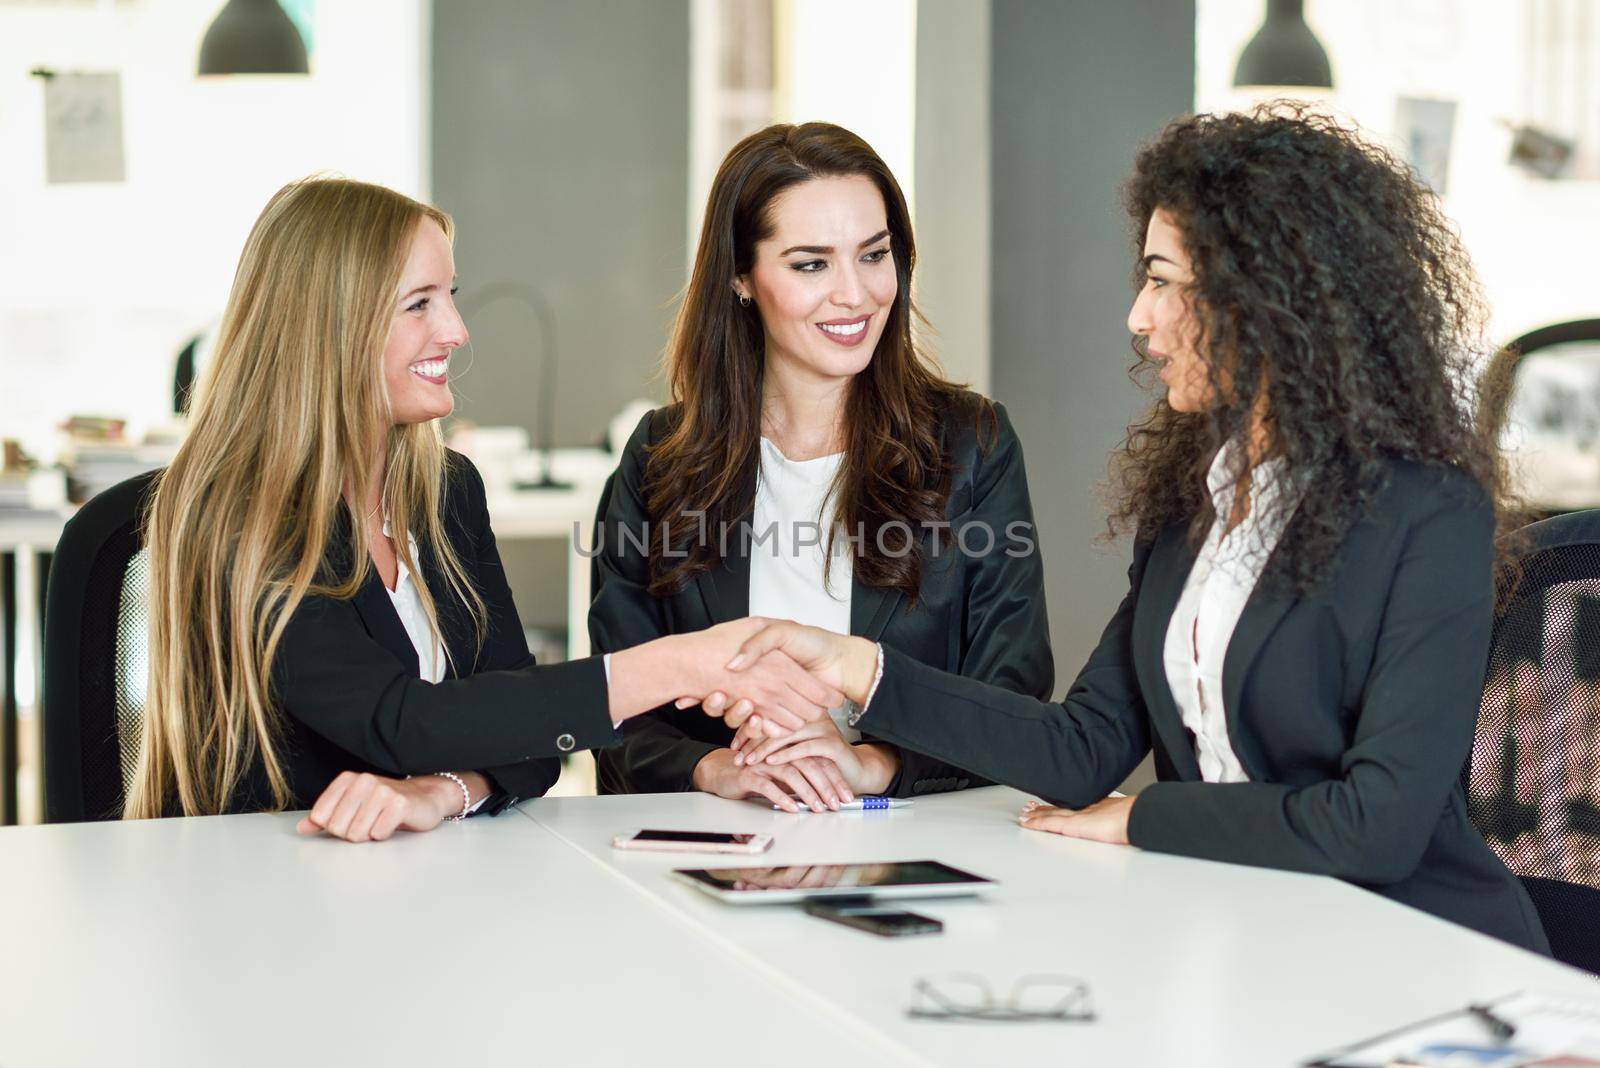 Three businesswomen shaking hands in a modern office with white furniture. Teamwork concept. Caucasian, blonde, and muslim girls wearing suit. Multi-ethnic group of women